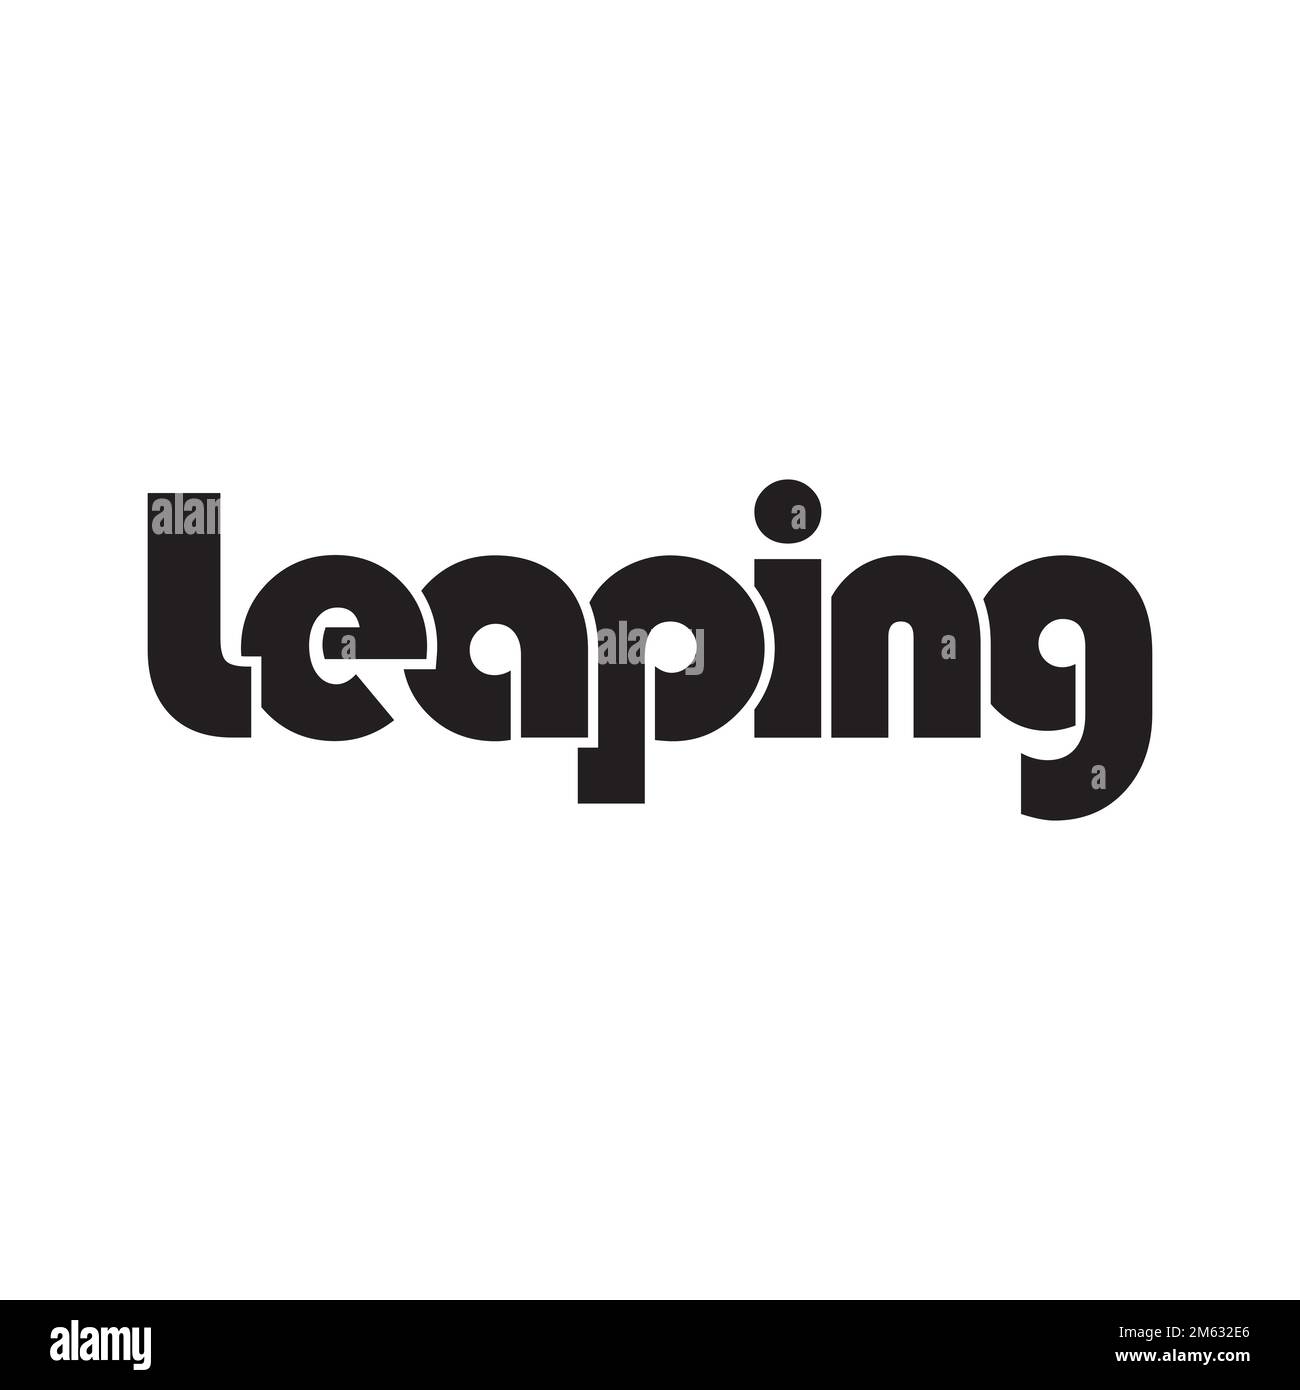 LEPAING text design vector isolated on white background. Stock Vector